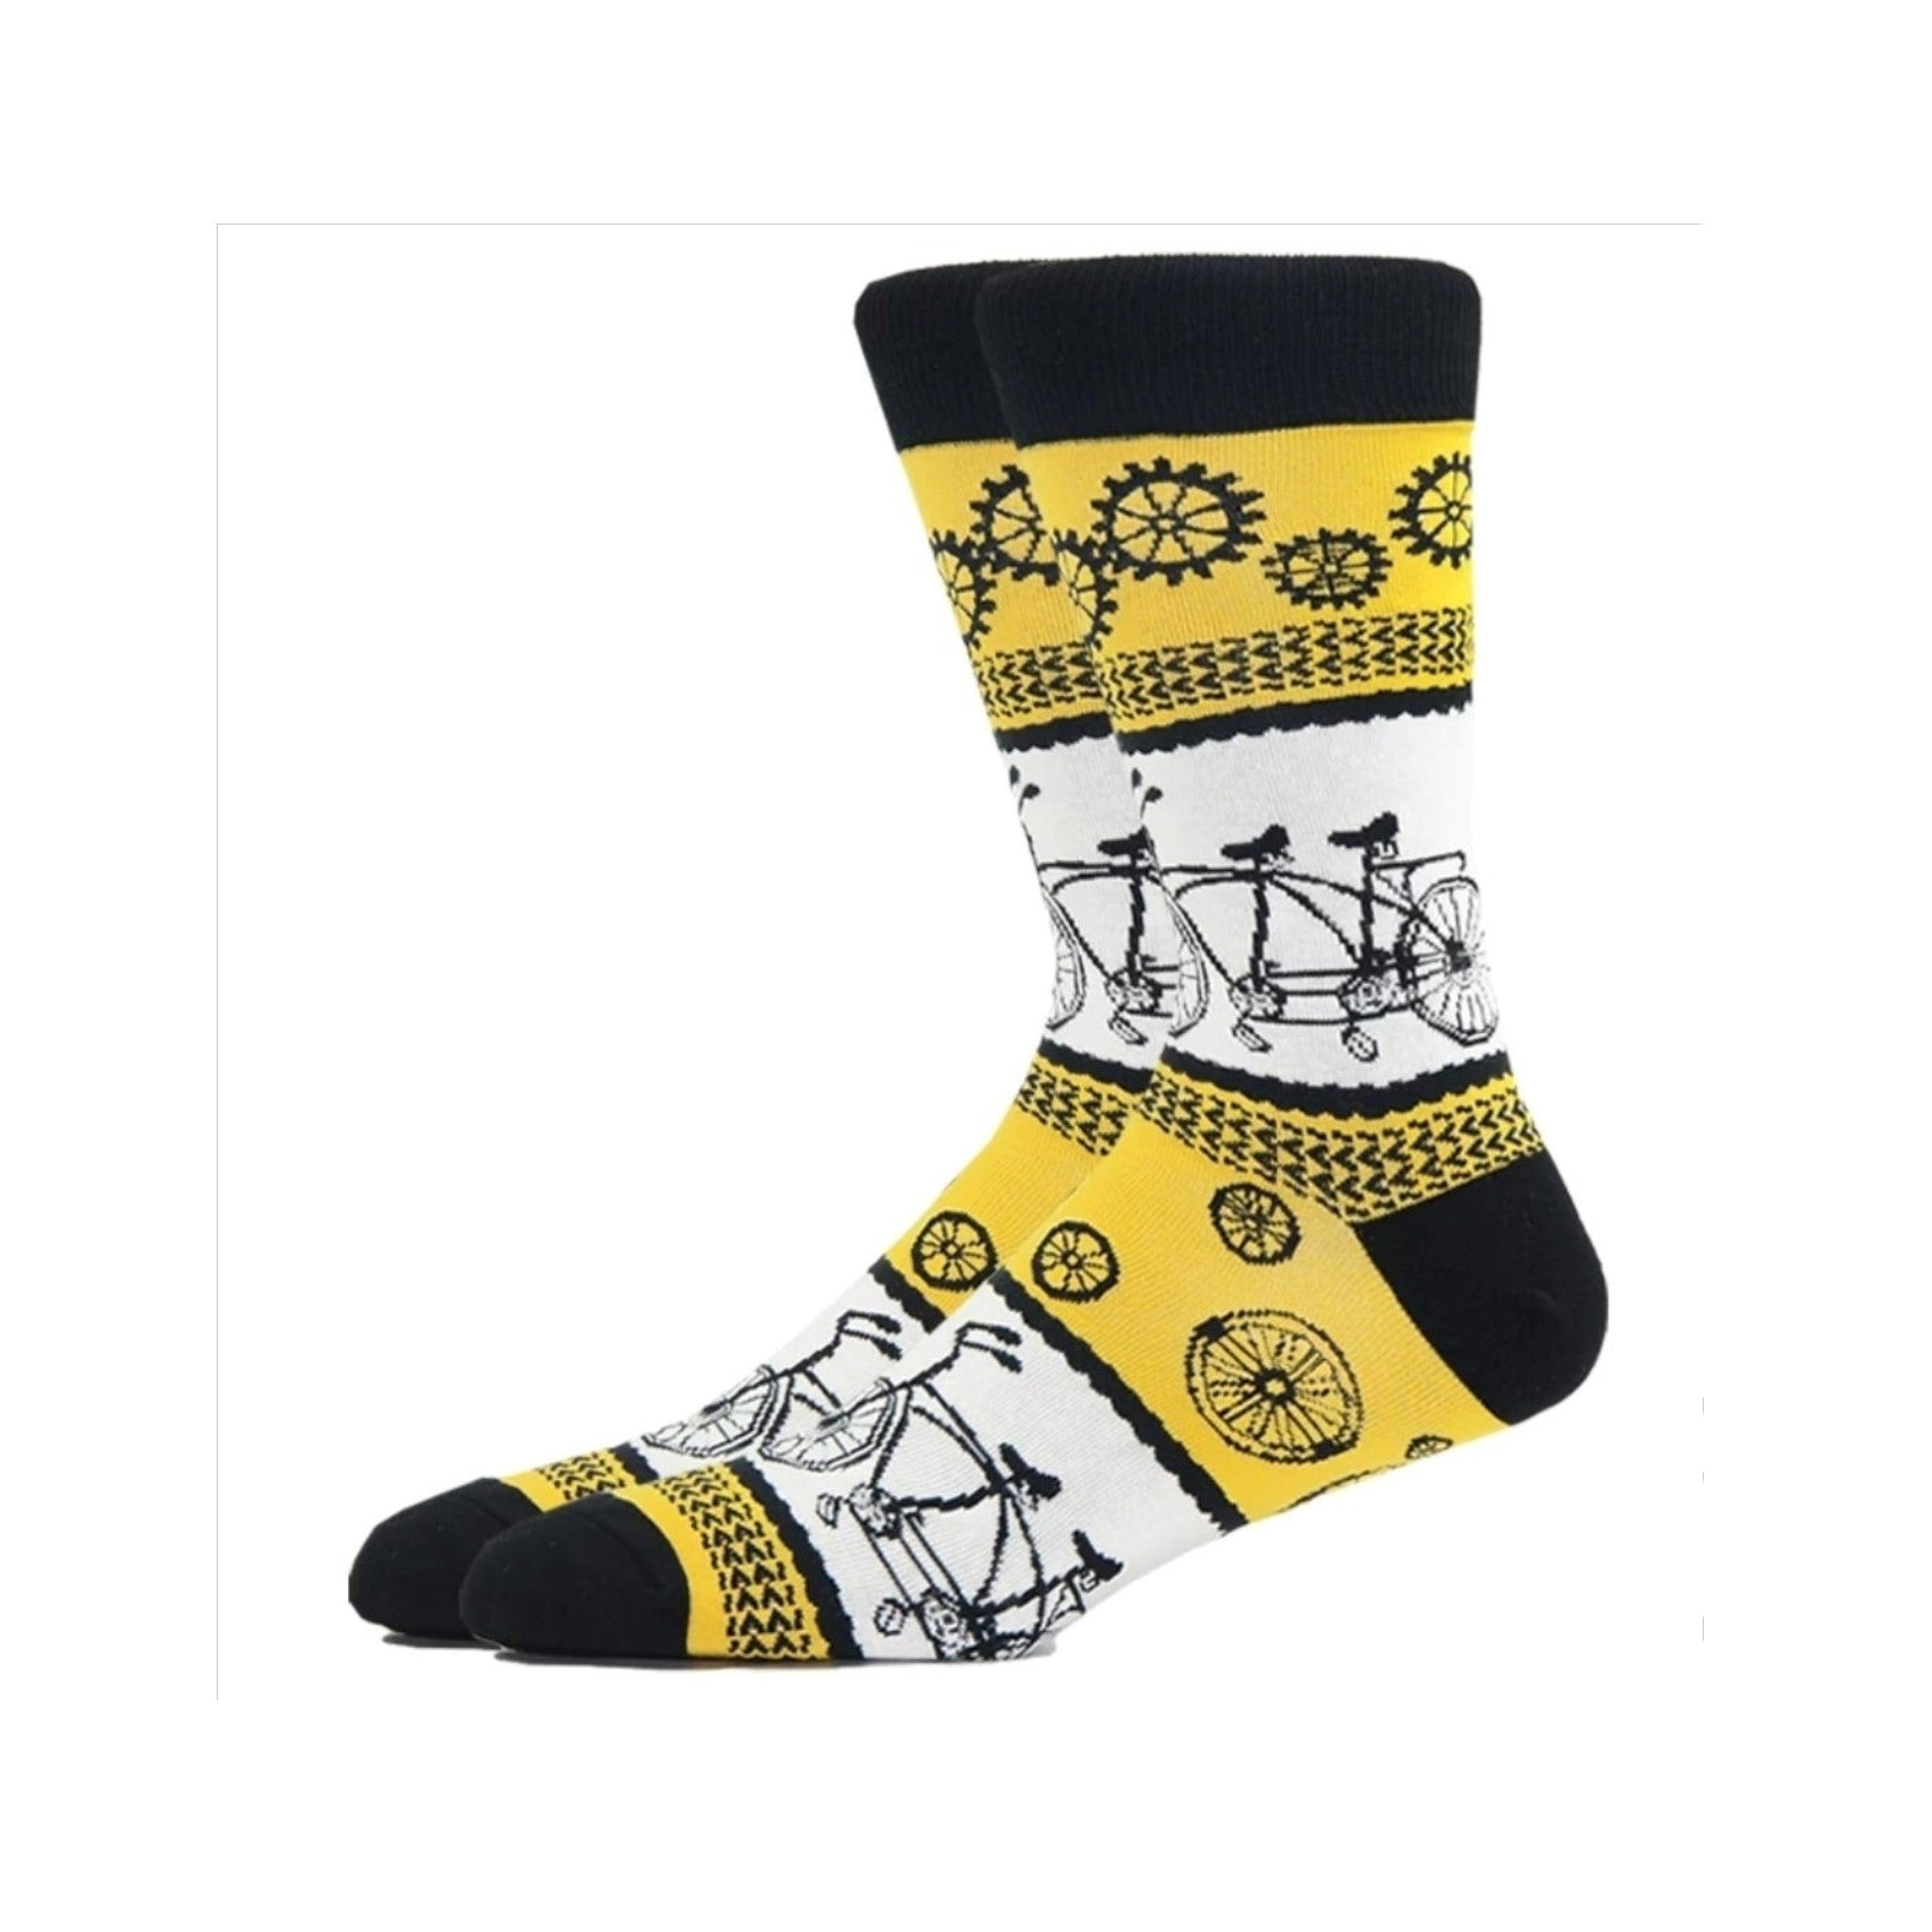 Vintage Bicycle Pattern Socks from the Sock Panda (Adult Large)